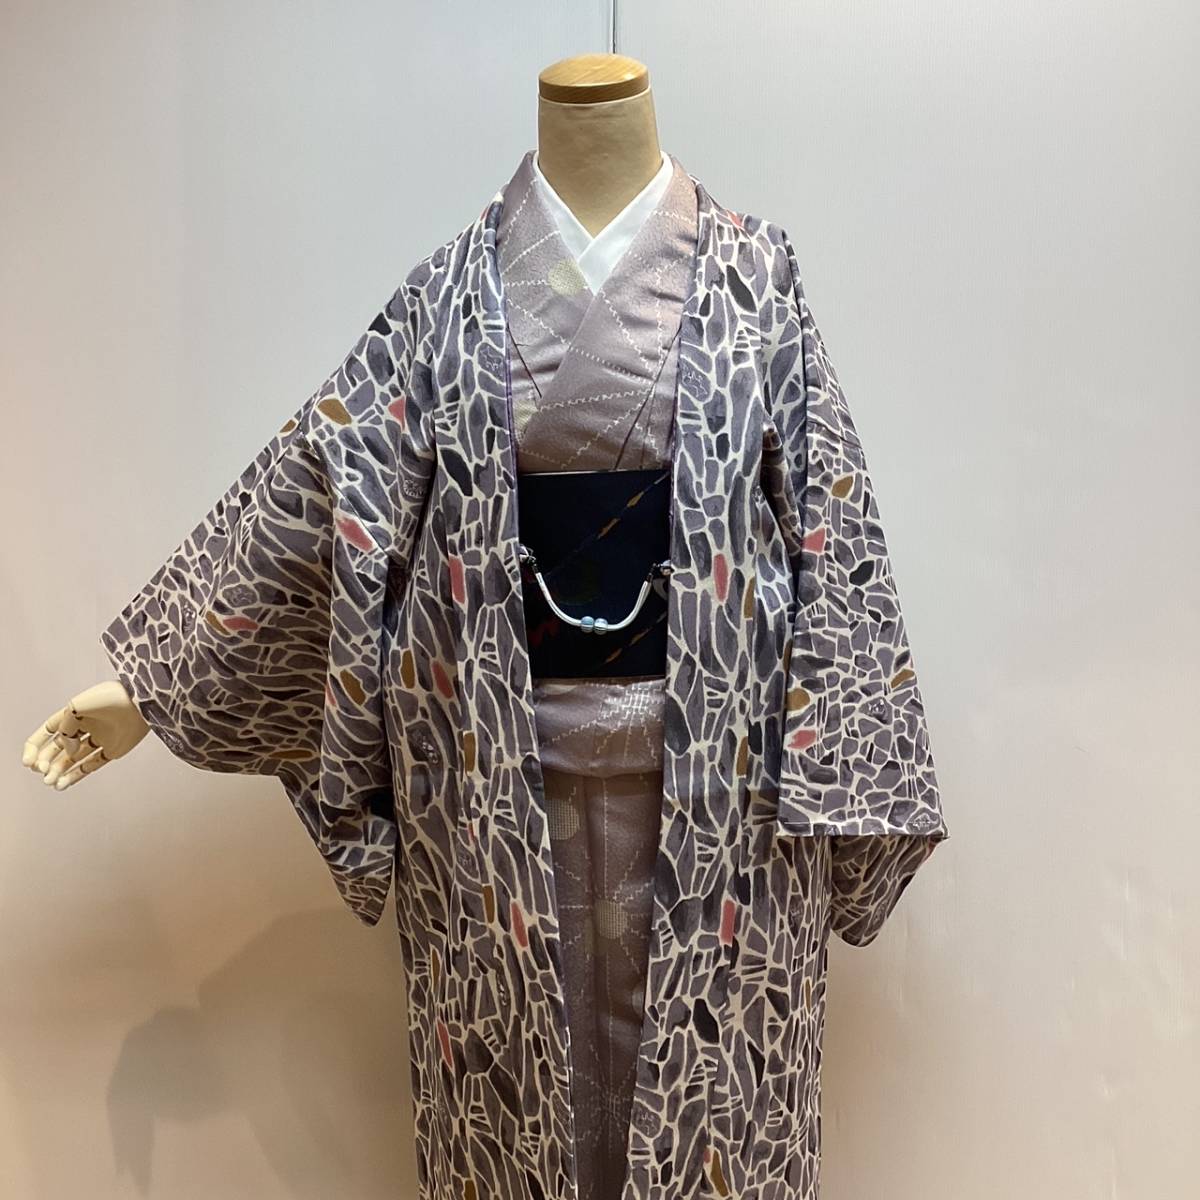  brand new feather woven ha165a. what .. cat pattern kimono coat ... kimono new goods postage included 